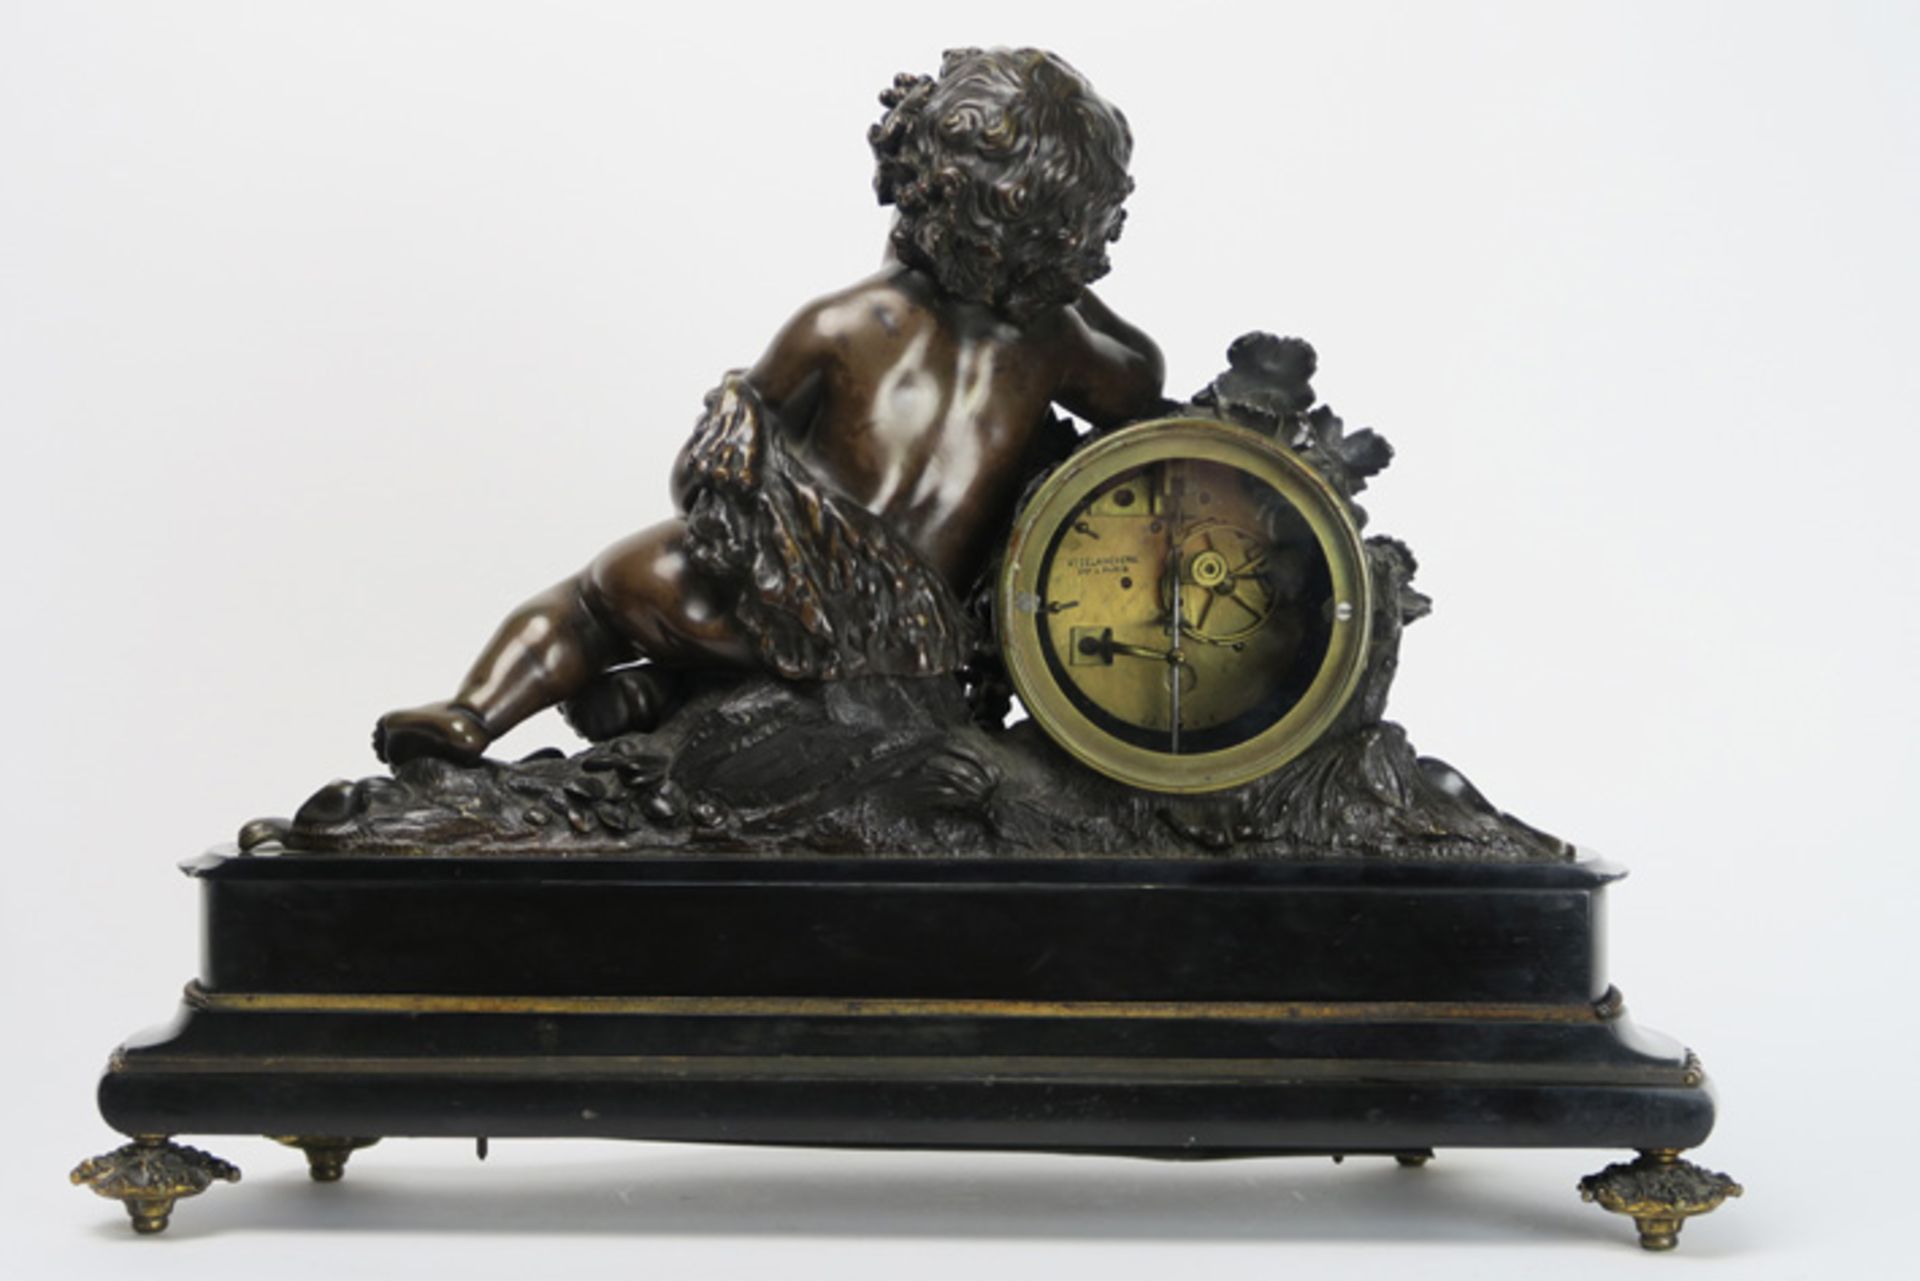 19th Cent. French clock in black marble and bronze & with a "S. Marti" signed work Negentiende - Image 2 of 4